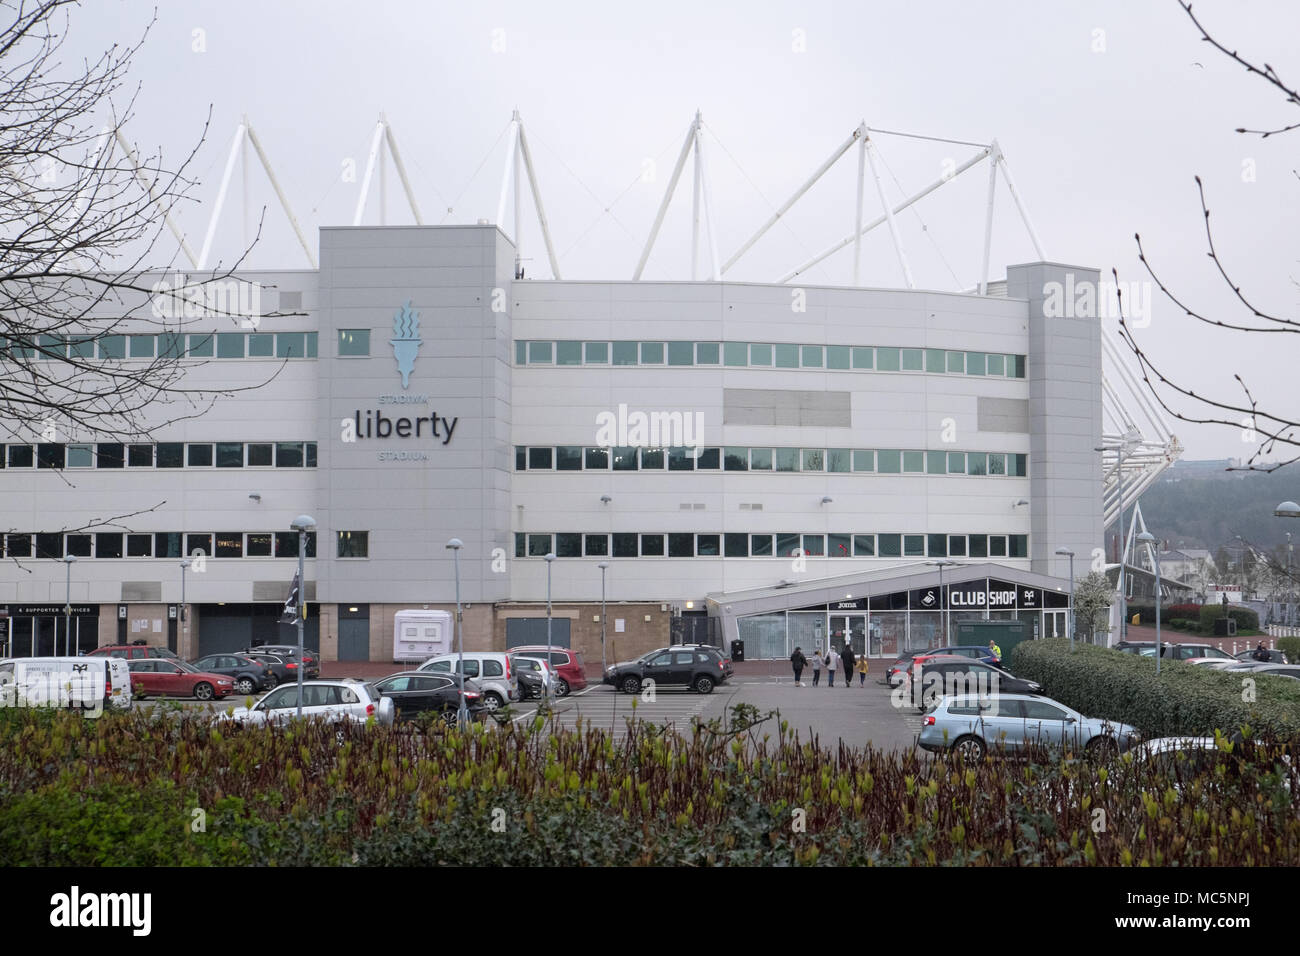 Liberty Stadium,home,stadium, of,Premier,League,Swansea,Football,Club,Swans,and,rugby,team,Ospreys,north, of,Swansea City,South Wales,Wales,Welsh,UK, Stock Photo